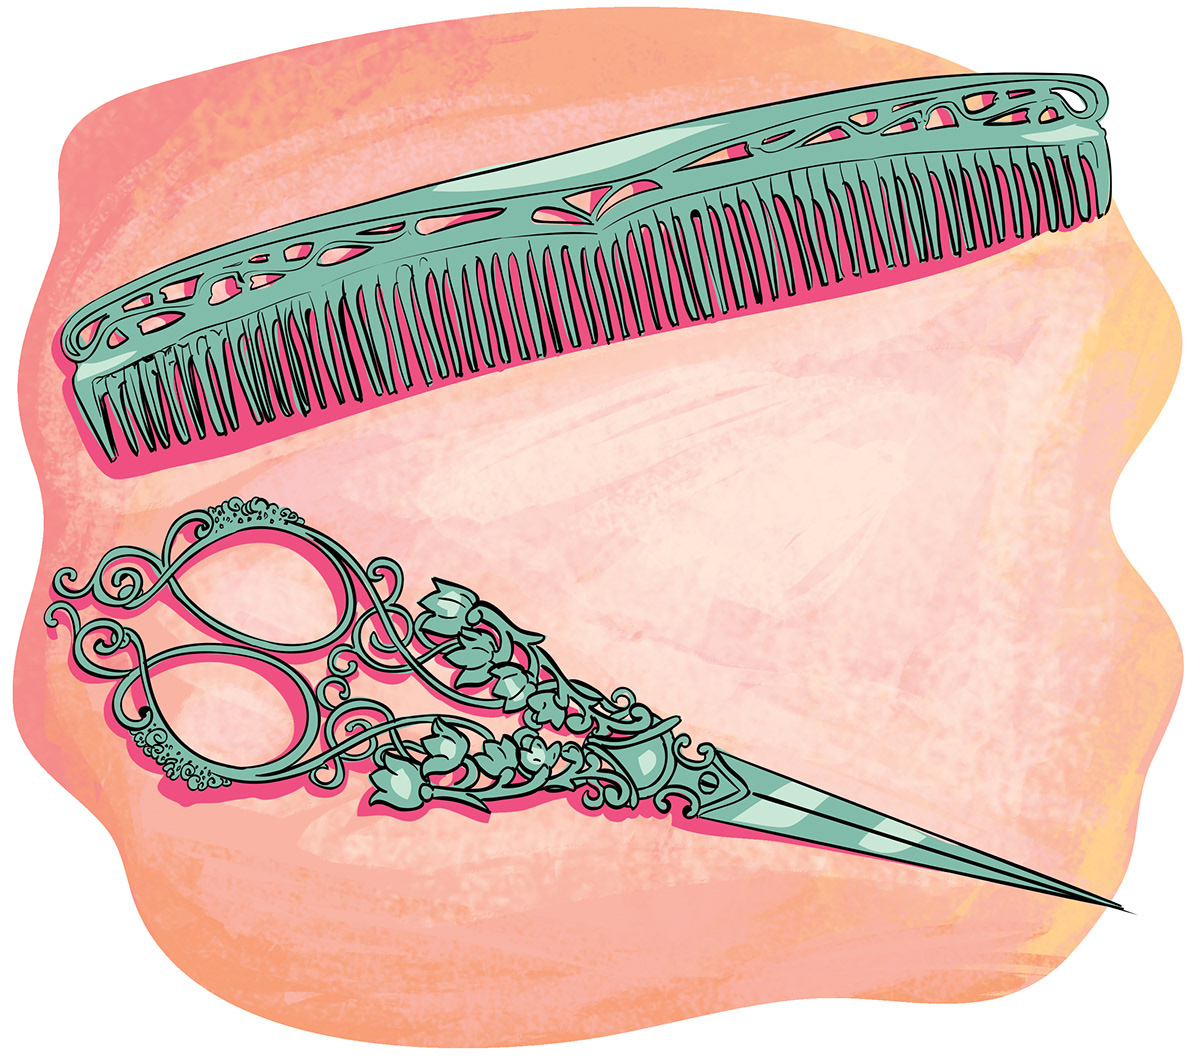 A comb and scissors, symbolizing the tools that help me groom and shape my everyday appearance.